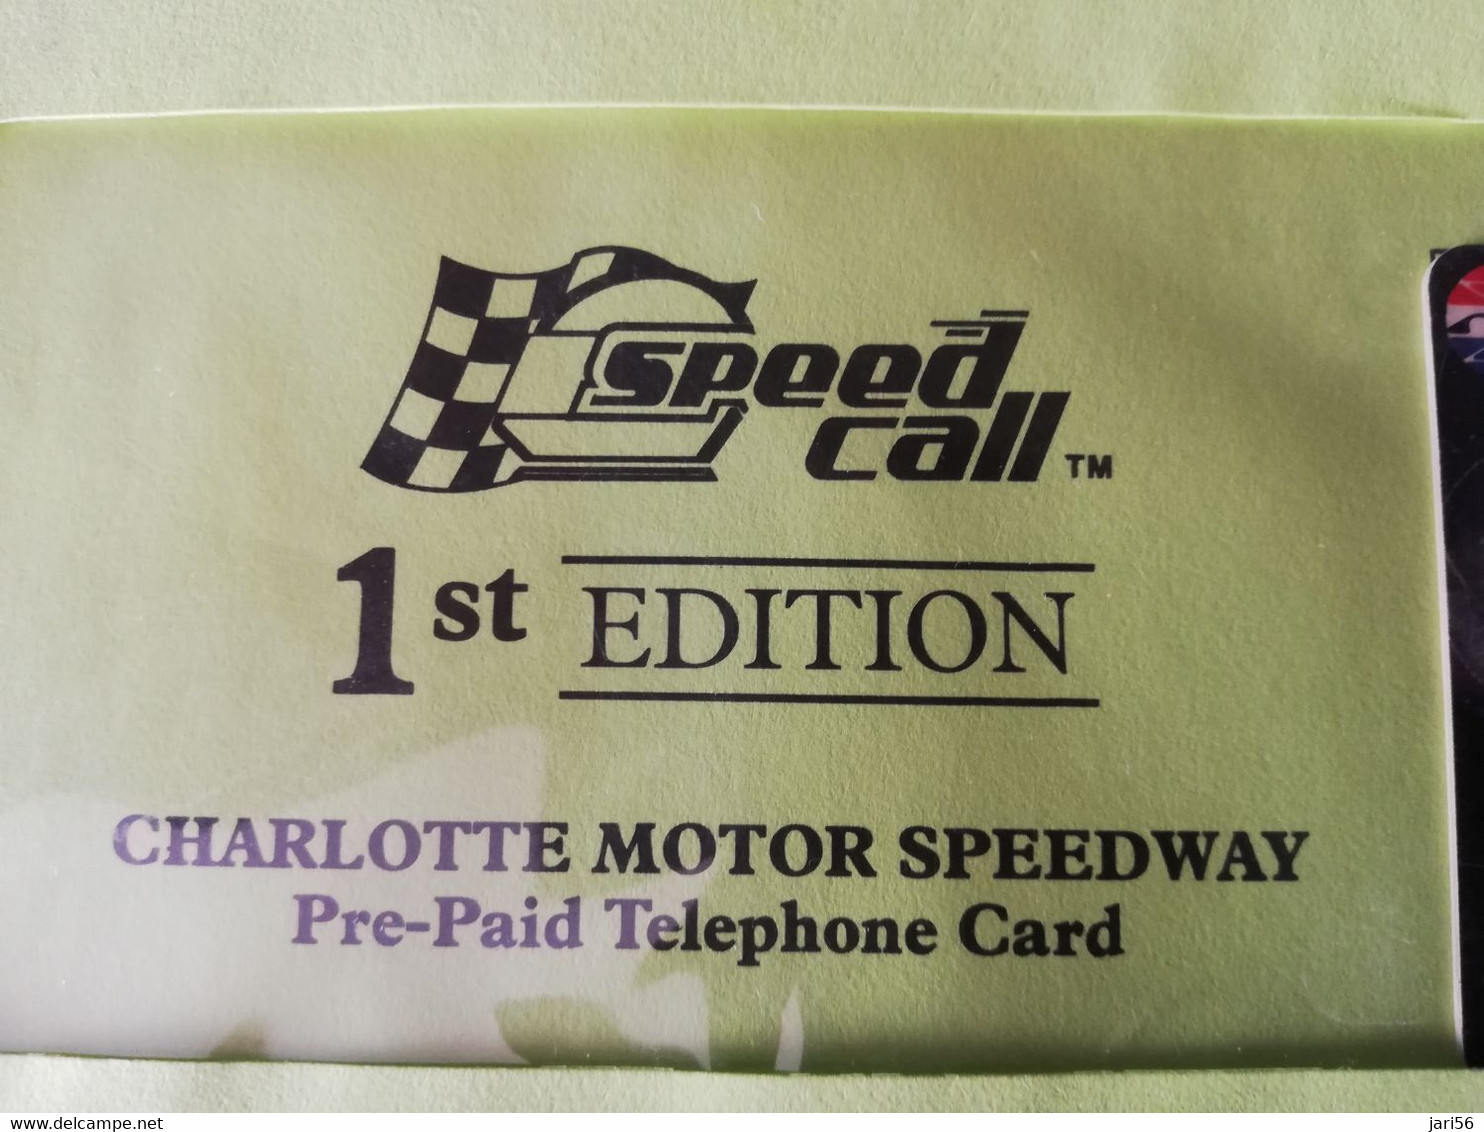 UNITED STATES /MELLOYELLO500/ SPEEDCALL/1ST EDITION  $5,-   MINT IN SEALED COVER    LIMITED EDITION ** 9399** - Collezioni